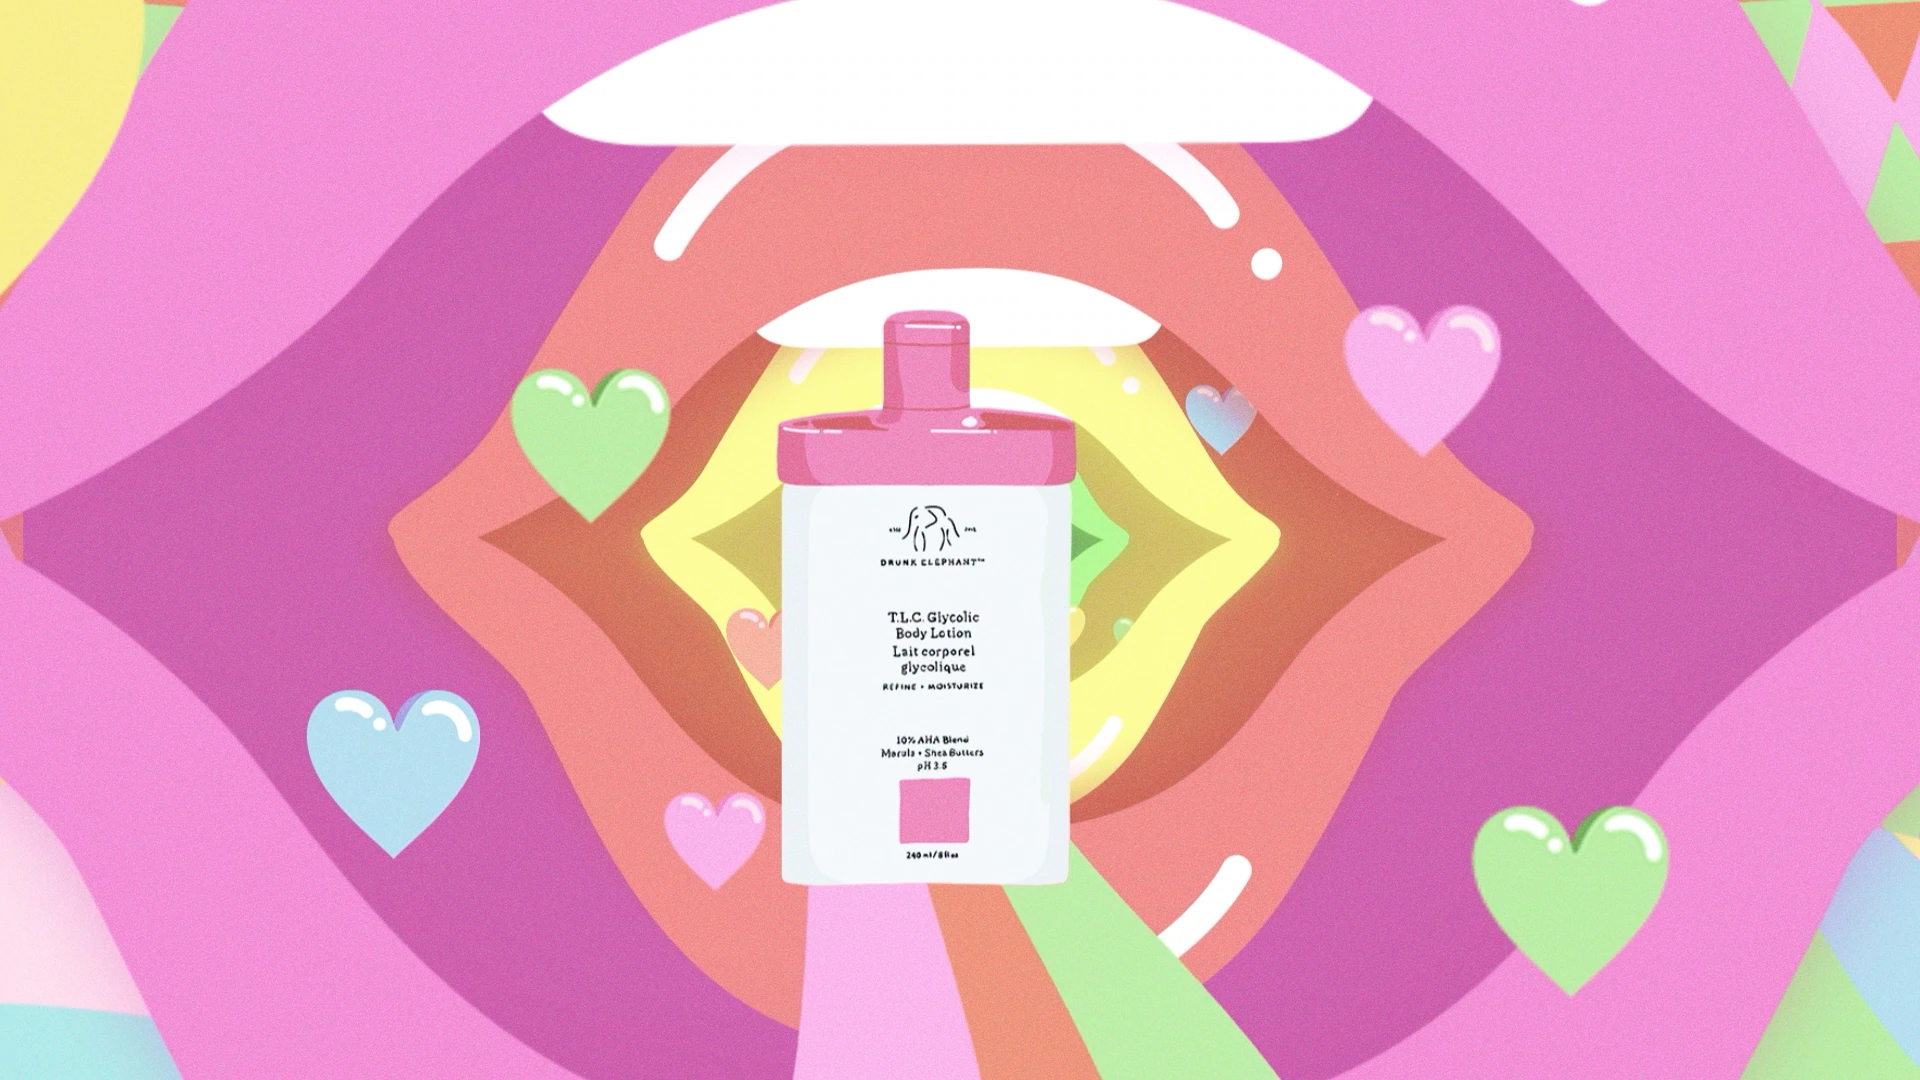 animated image showing T.L.C. Glycolic Body Lotion in front of an animated mouth